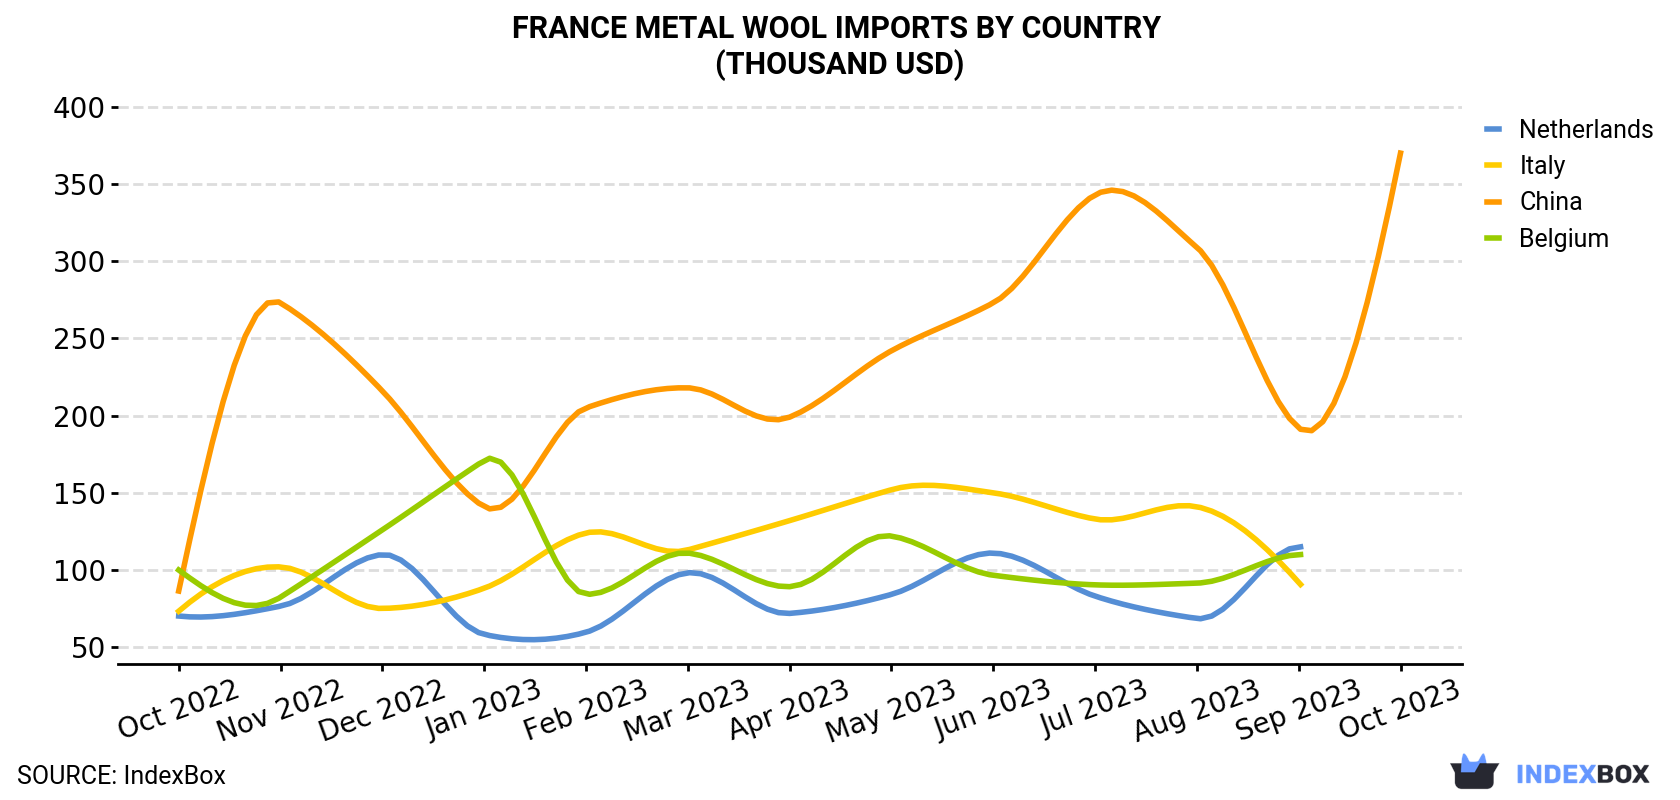 France Metal Wool Imports By Country (Thousand USD)